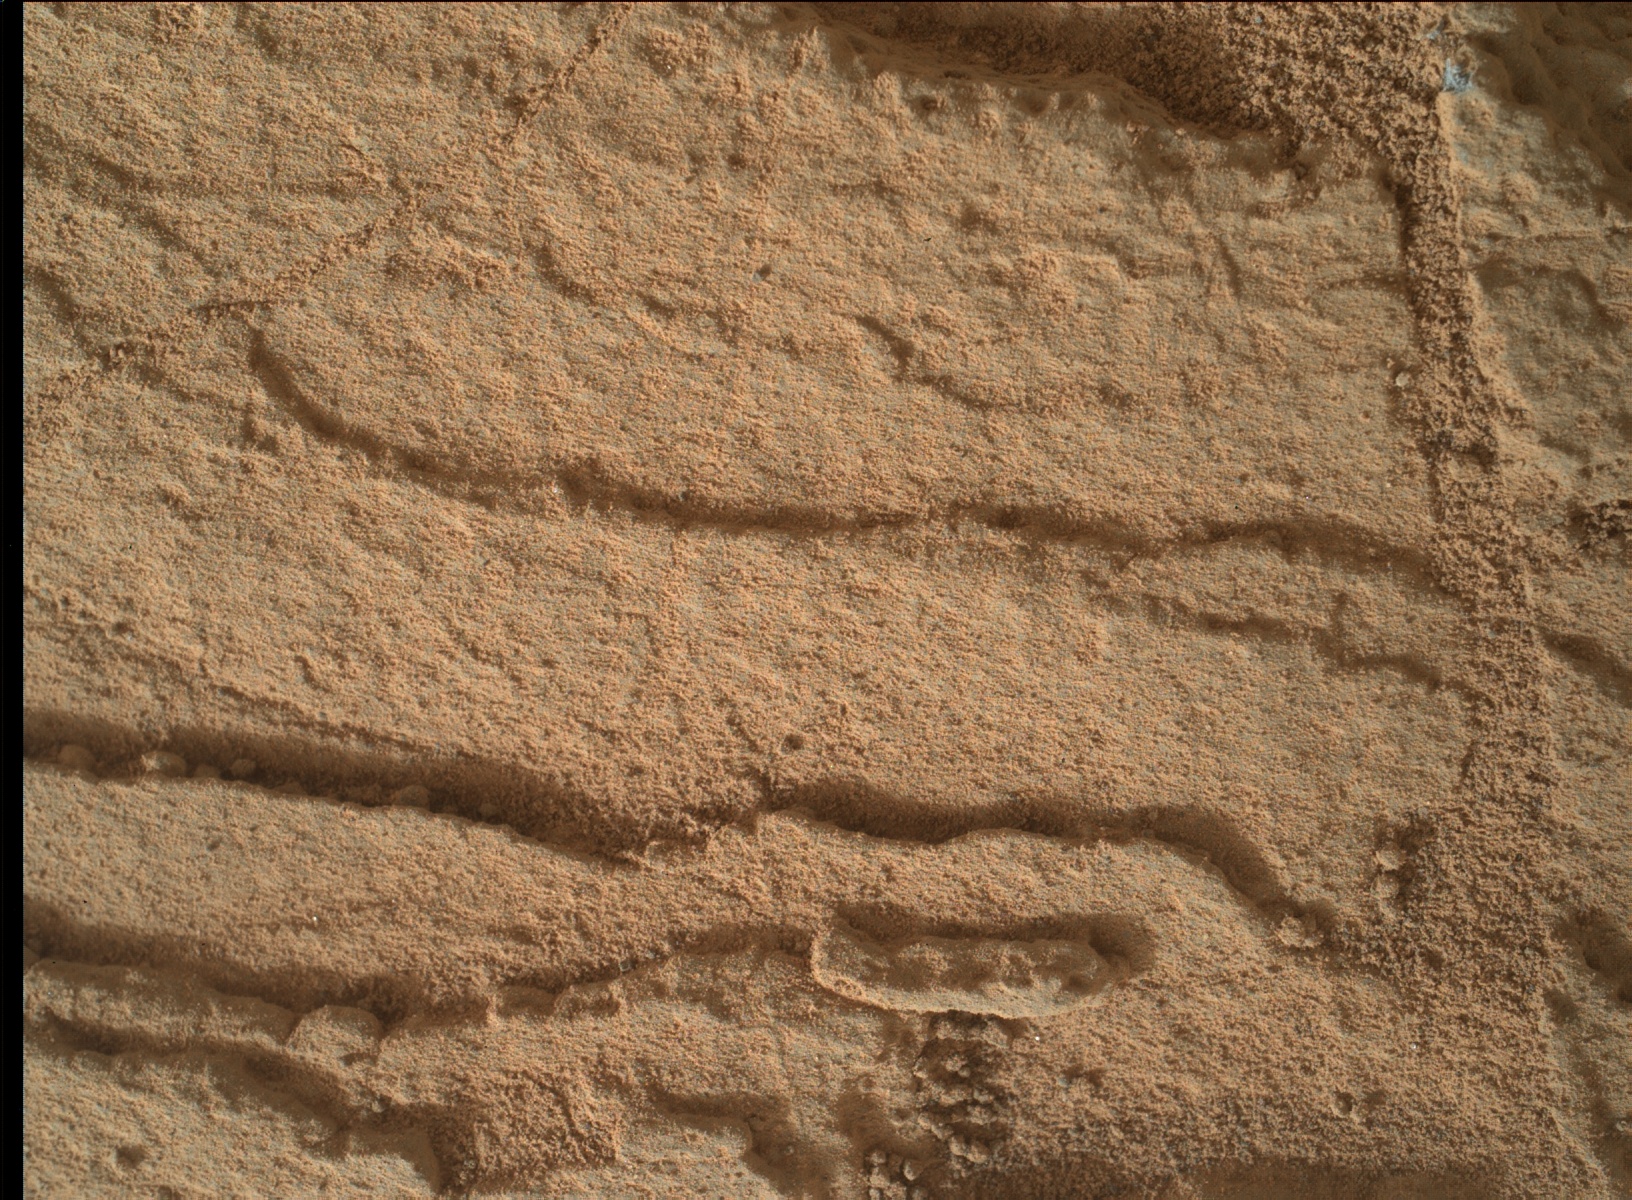 Nasa's Mars rover Curiosity acquired this image using its Mars Hand Lens Imager (MAHLI) on Sol 833